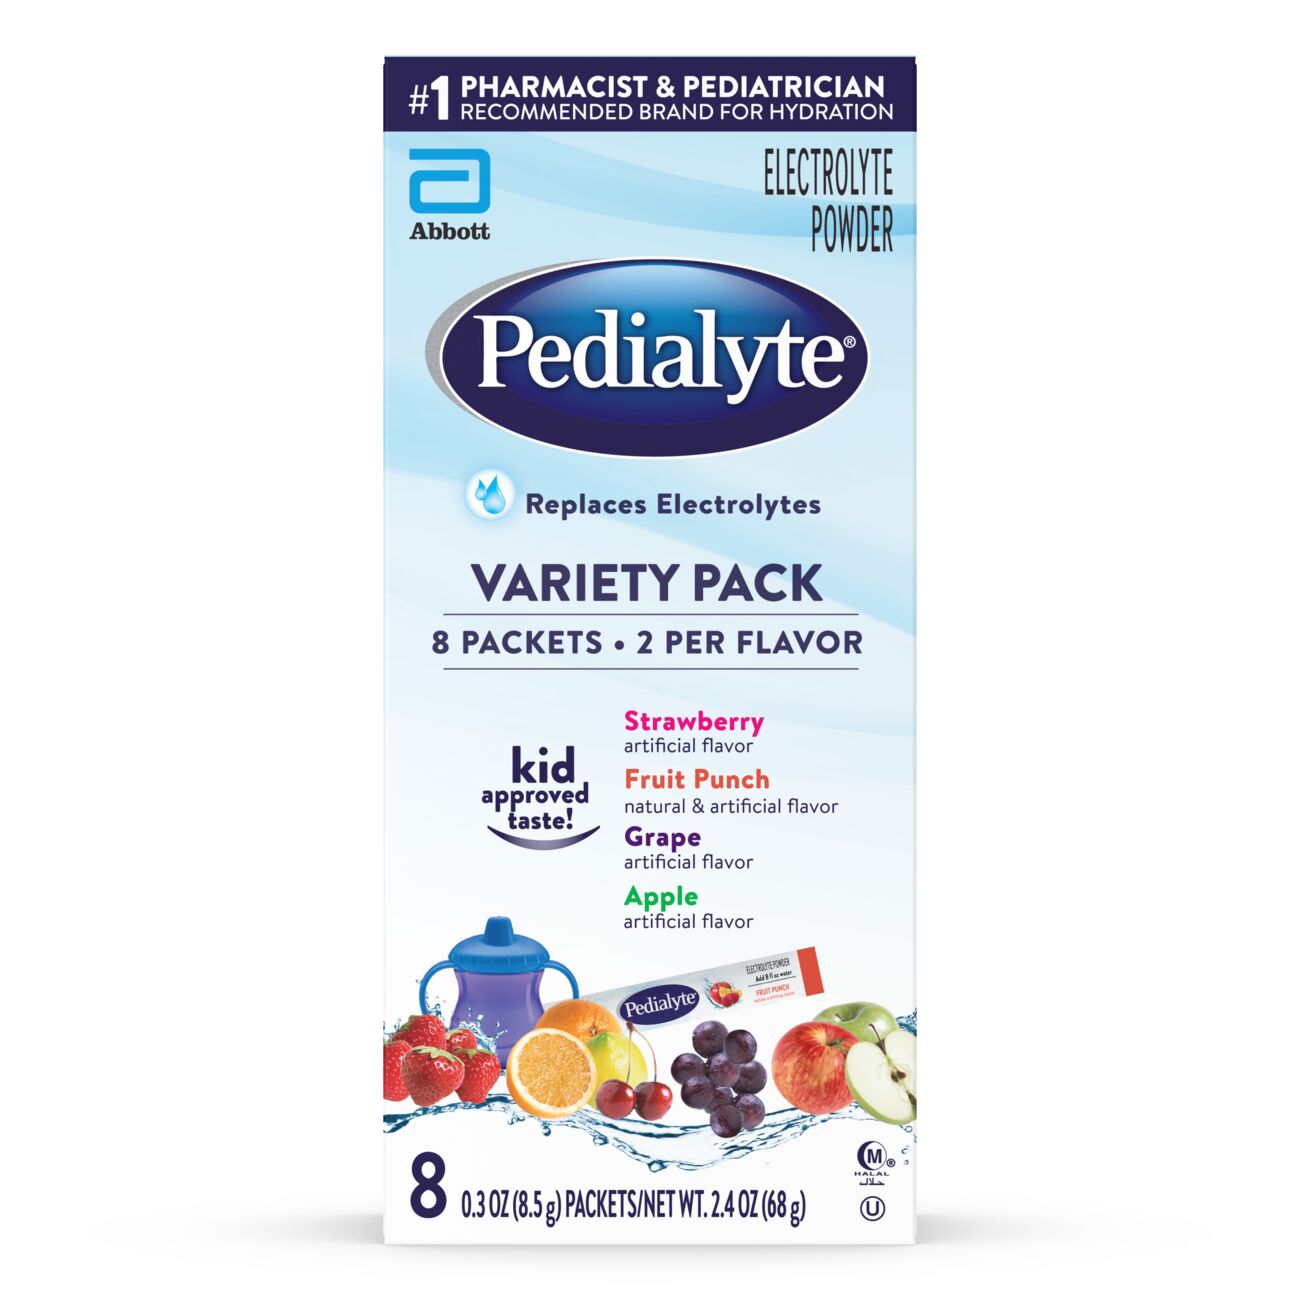 Pedialyte Electrolyte Powder Packets, Variety Pack, 8 Single-Serving Packets